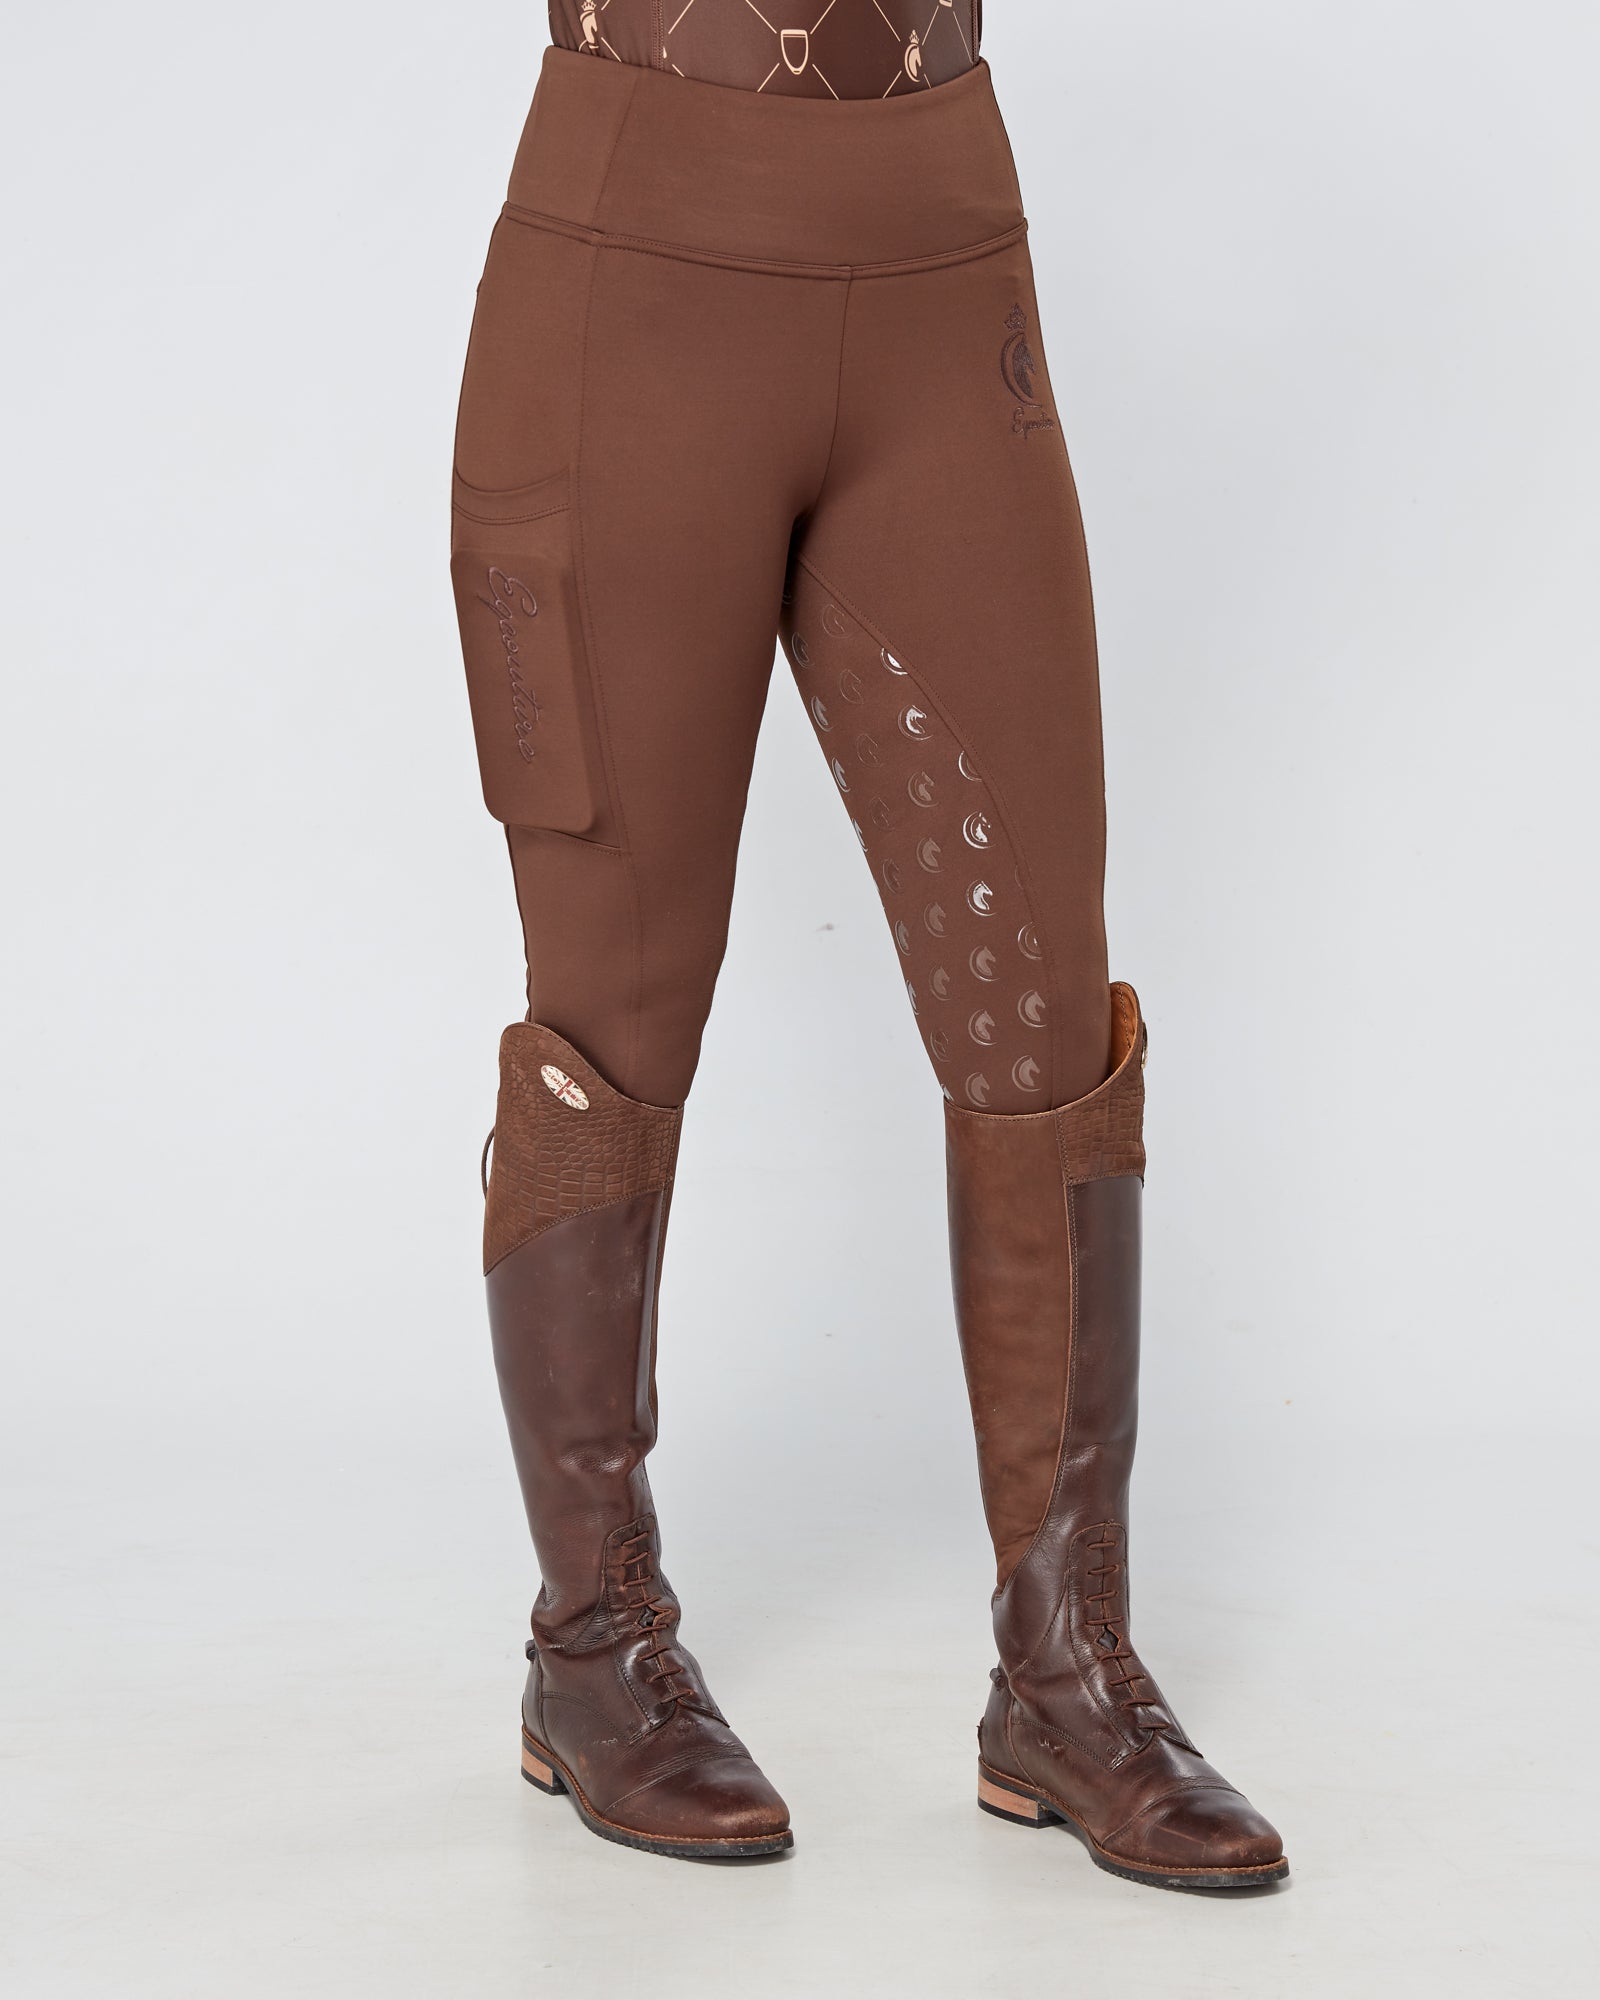 brown riding leggings tights with grip pockets